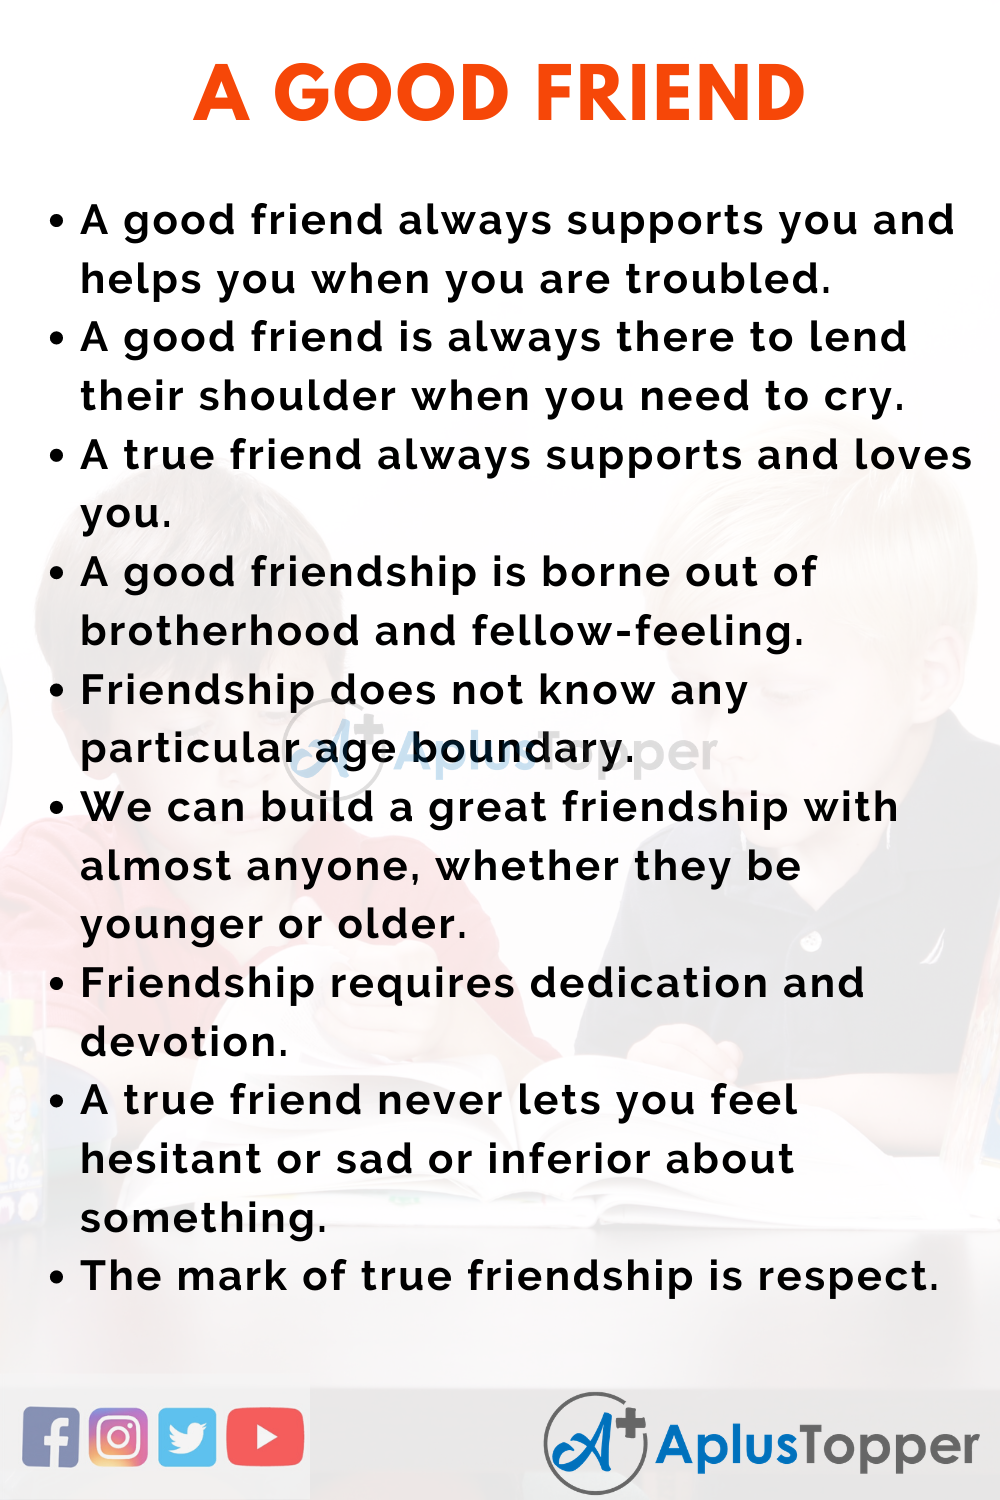 essay on friendship for class 12